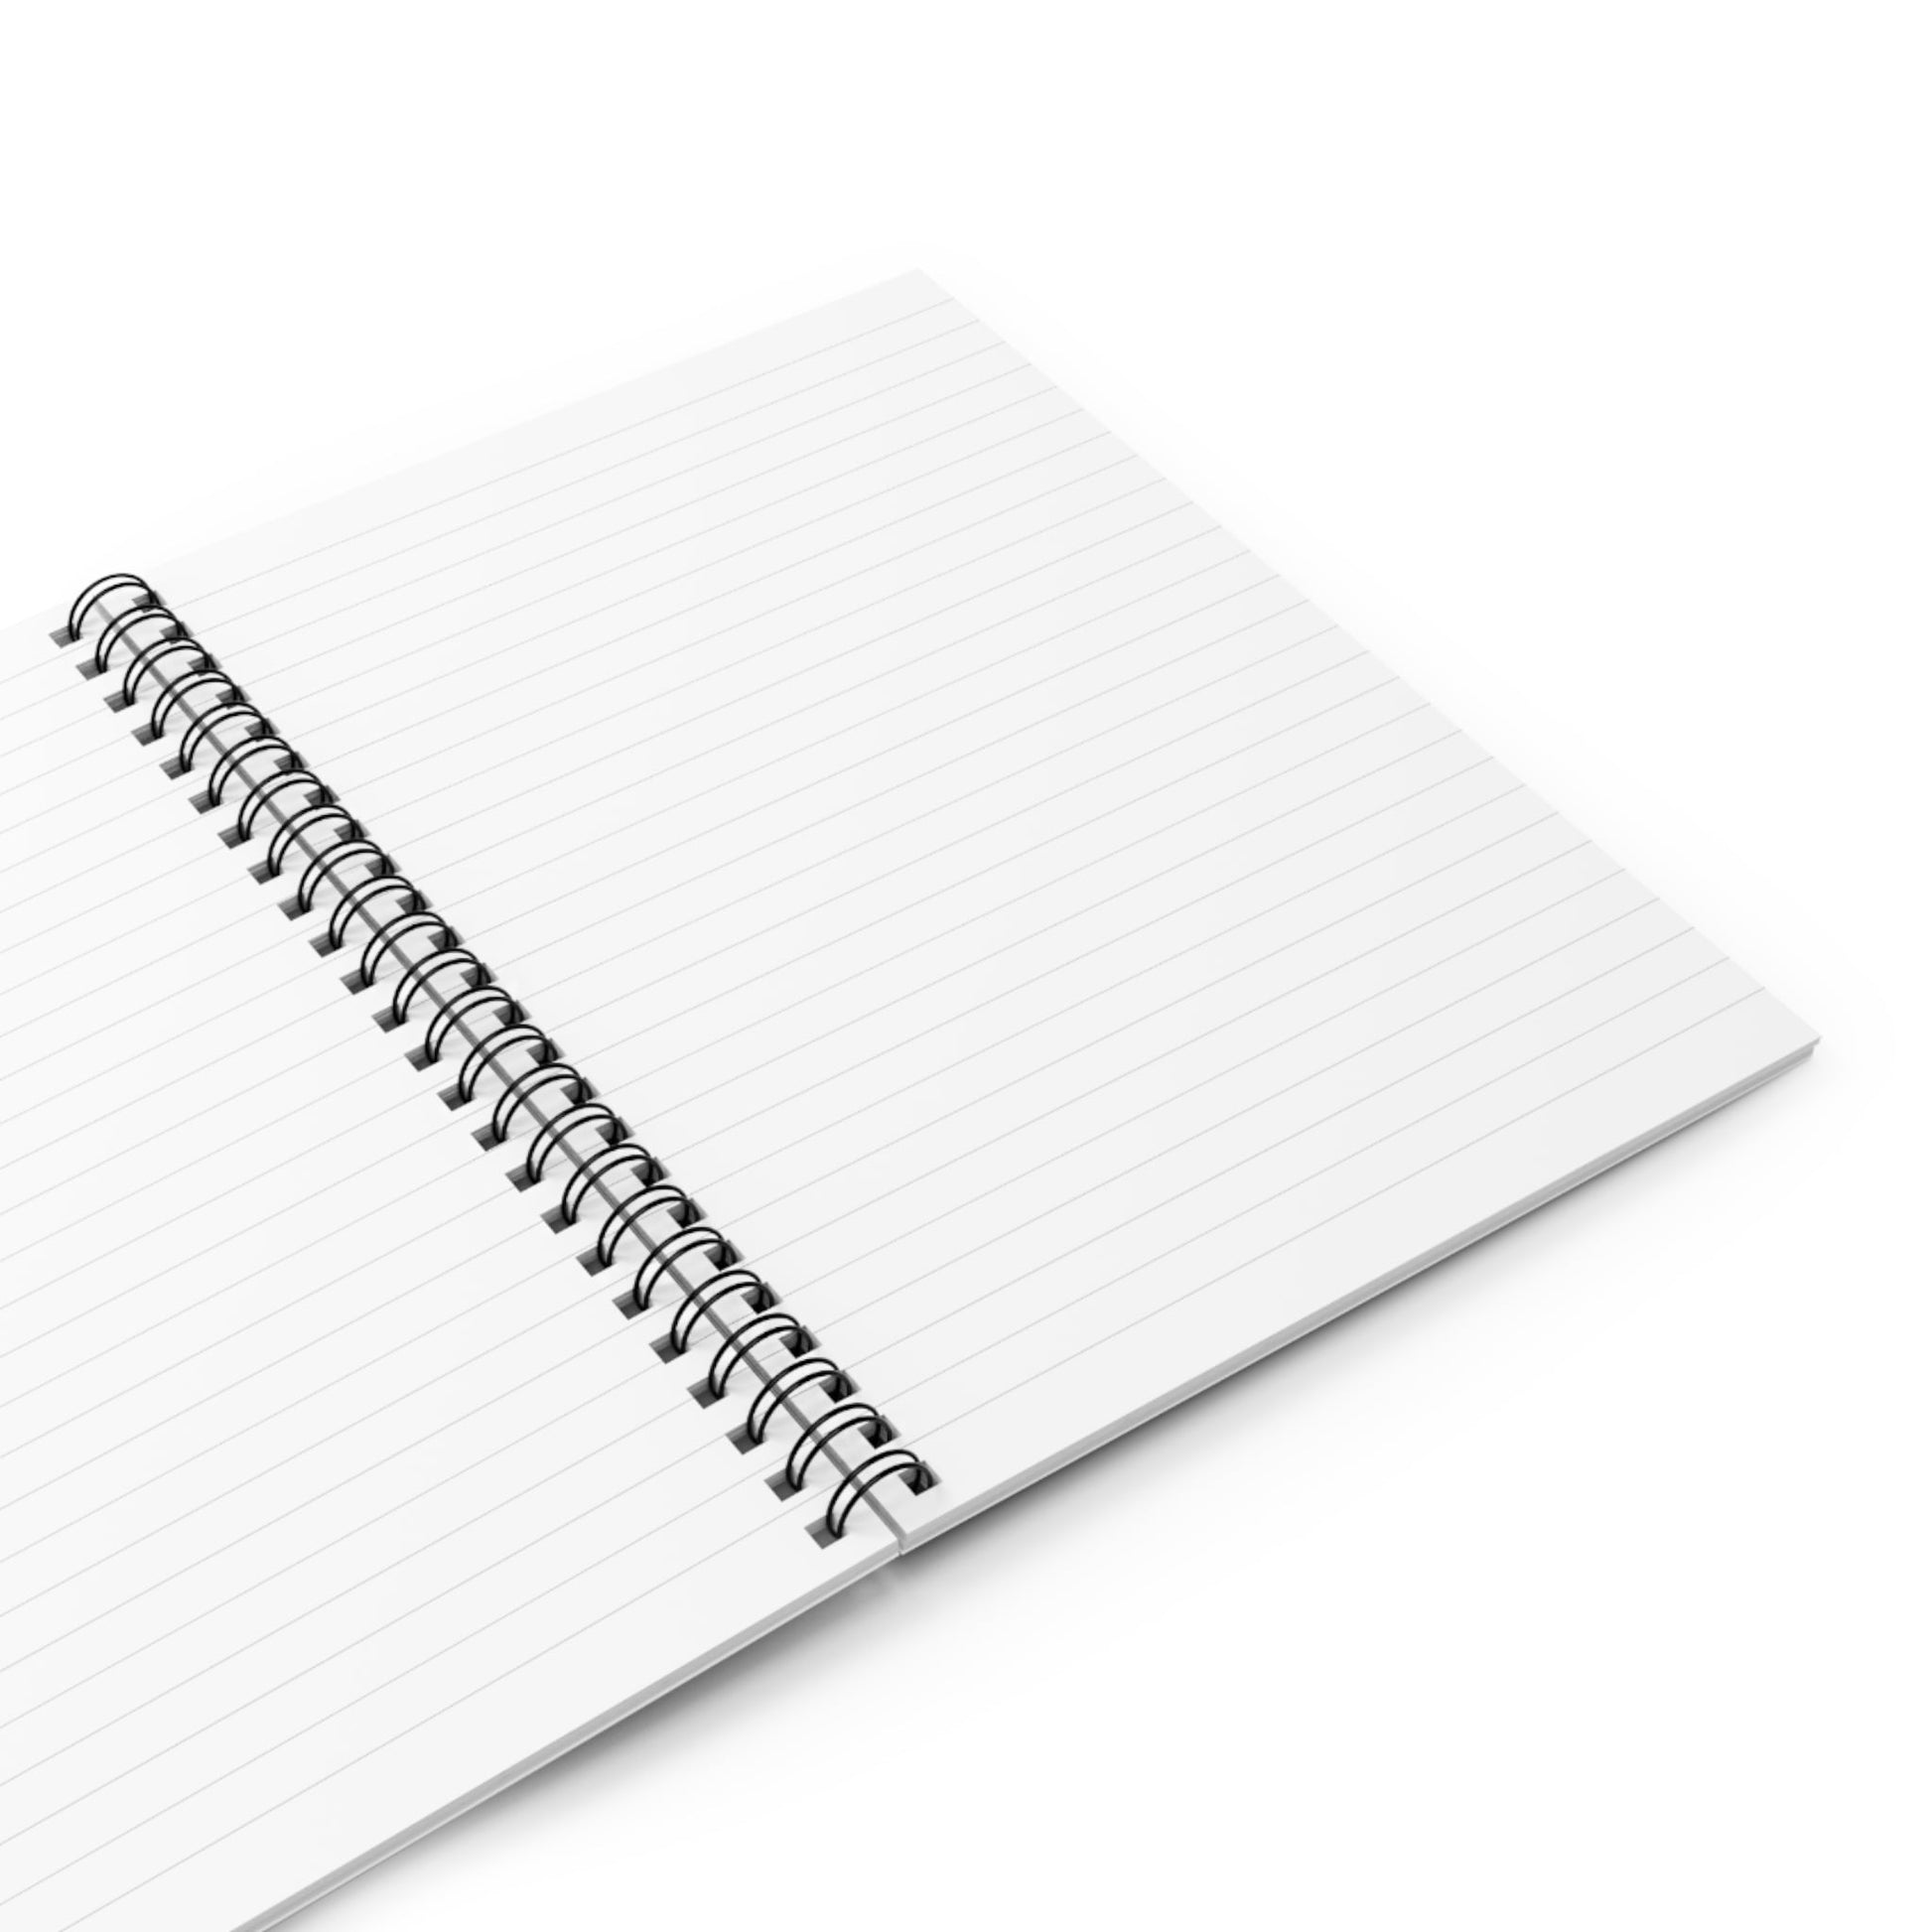 Spiral Notebook with Reach for the Moon Cover Opened with Blank White College Ruled Pages